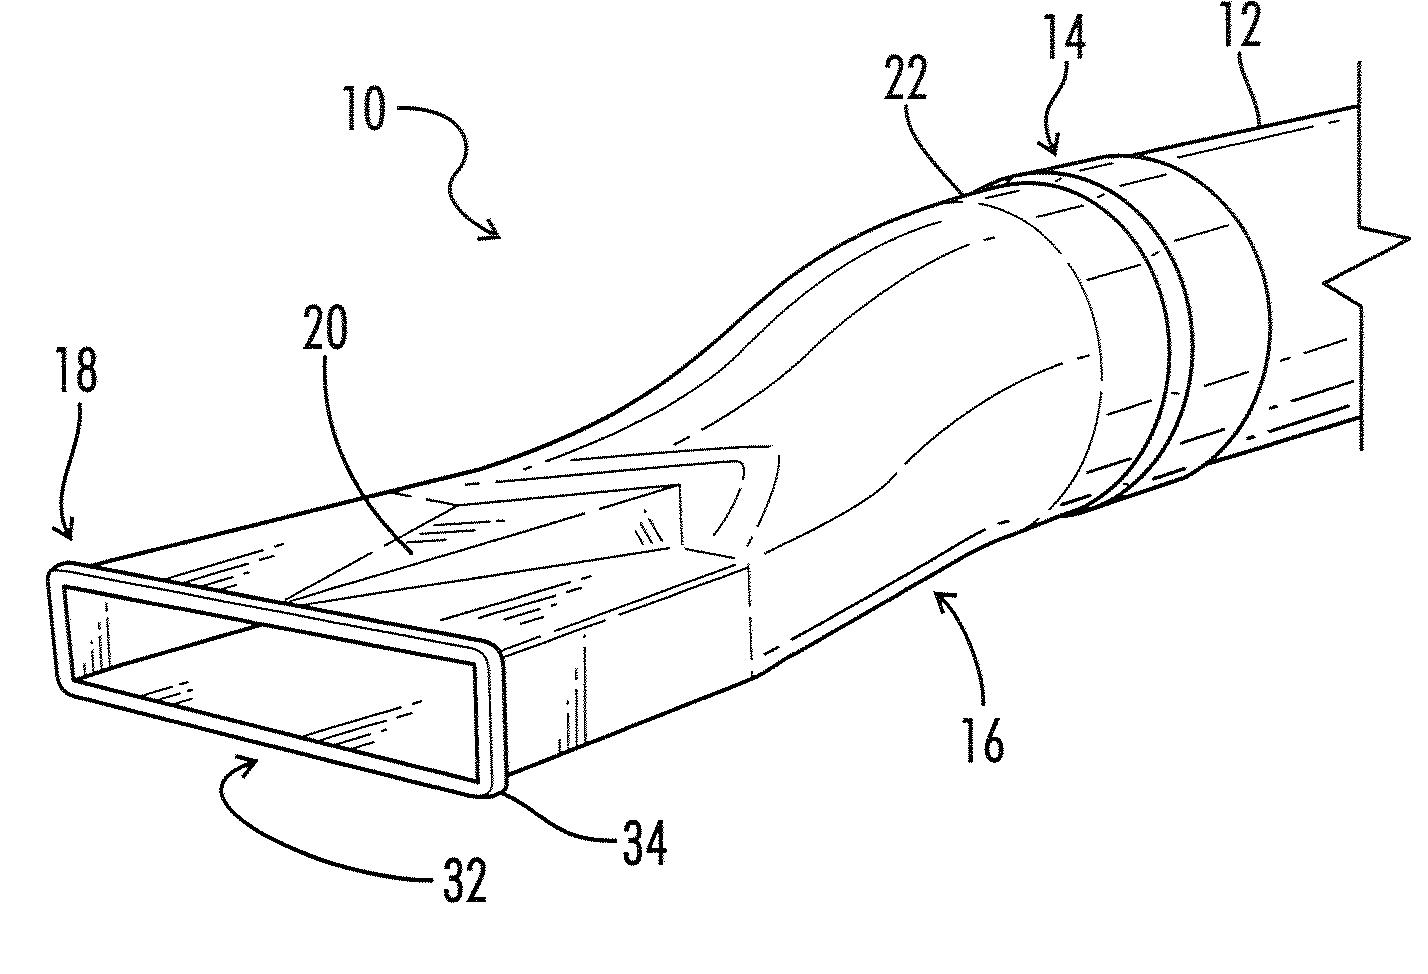 Low profile attachment for emitting water